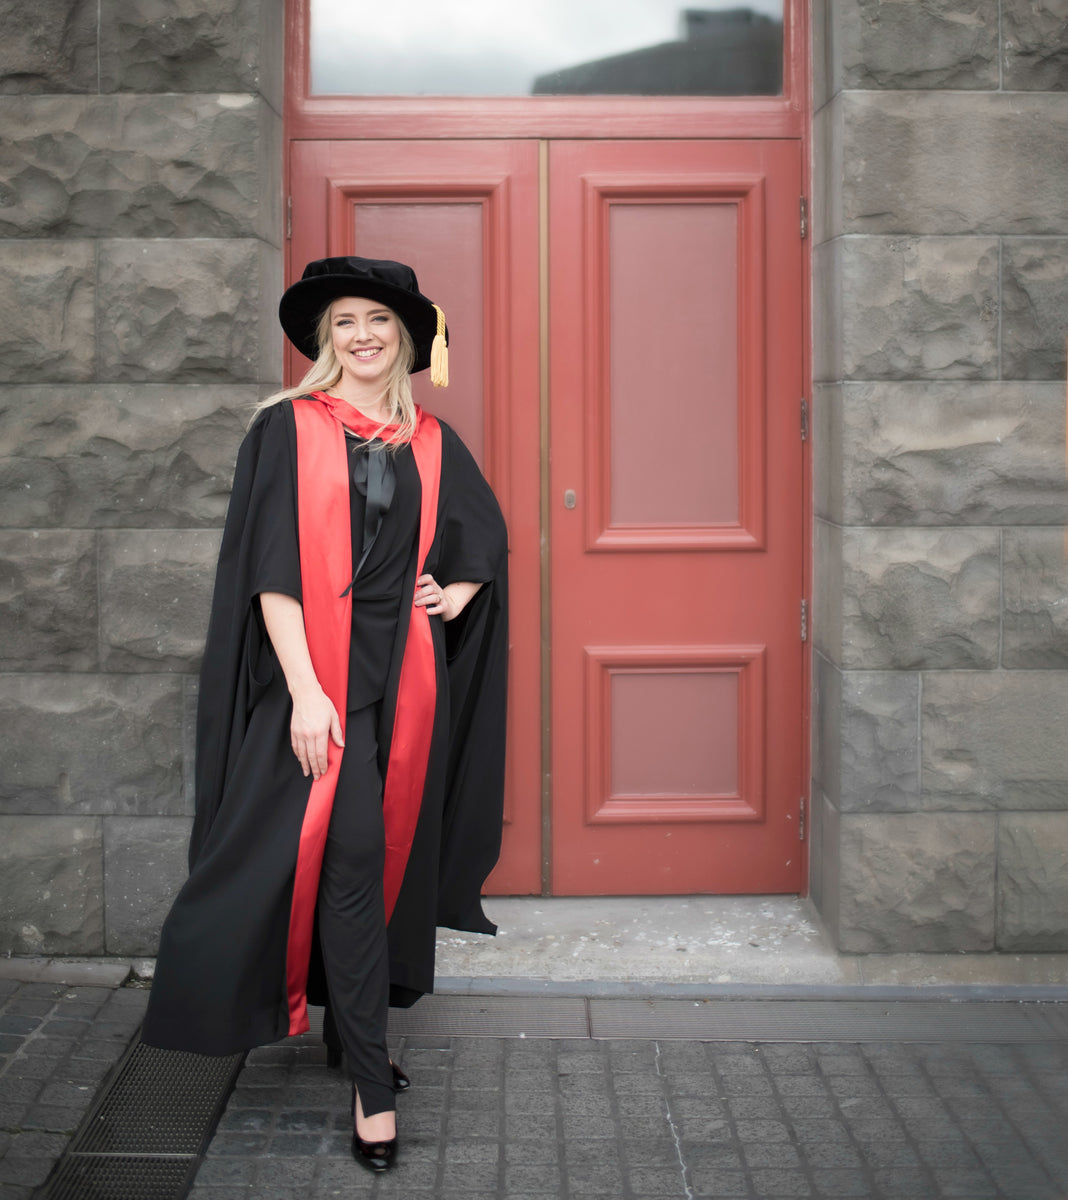 Graduation outfit of Dr Julie Bhosale, standing outside of door and smiling